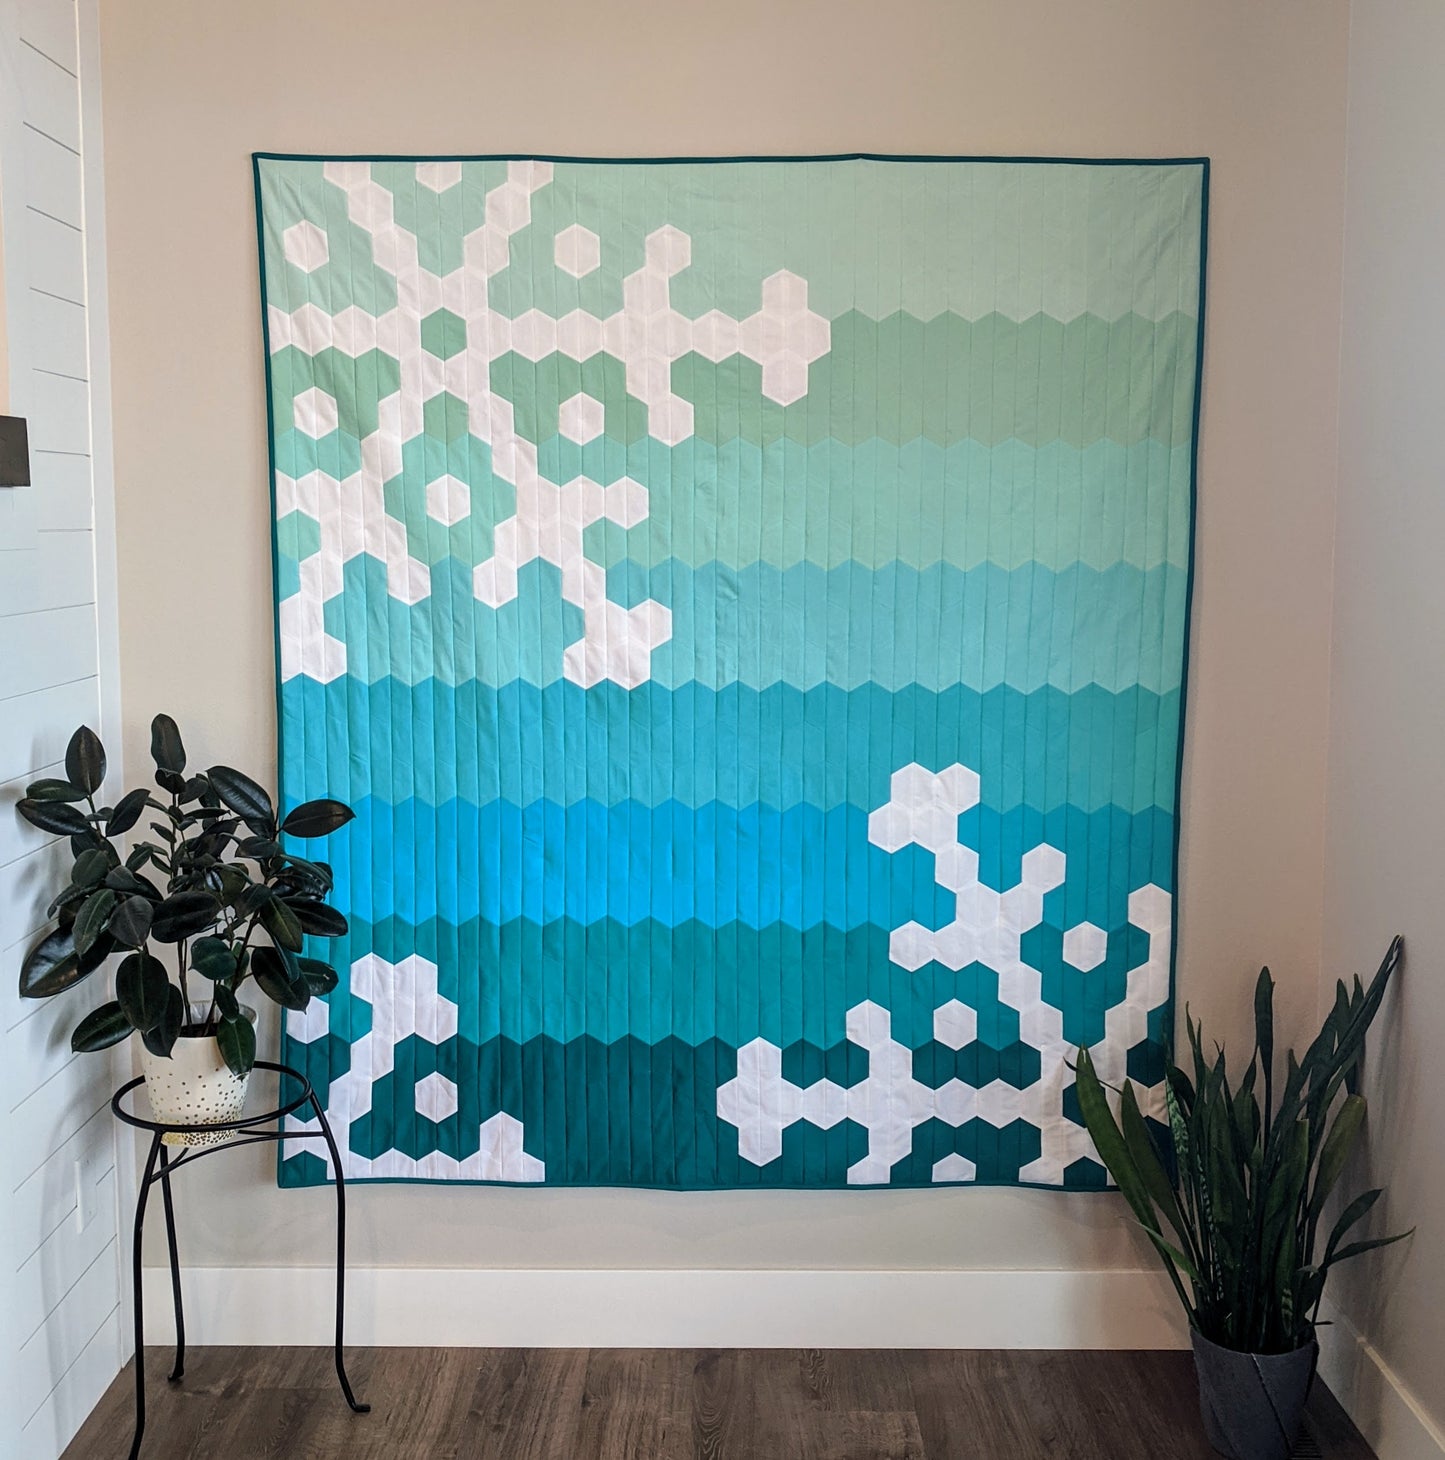 Ombre green and white snowflake and hexagon quilt on wall.